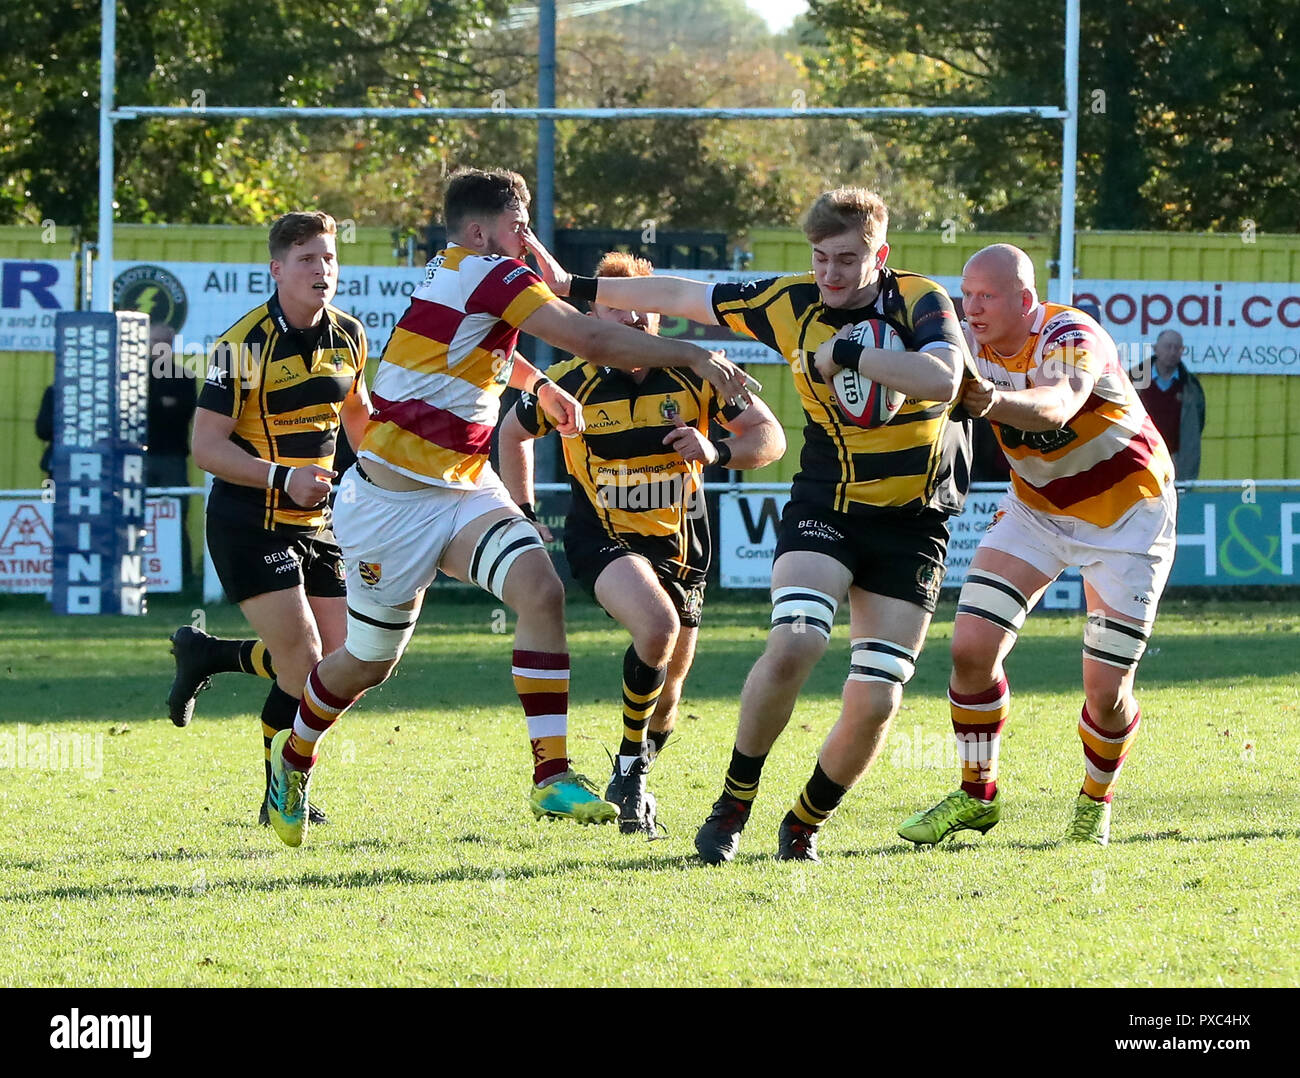 20.10.2018 Hinckley, Leicester, England. Rugby Union, Hinckley rfc v Fylde rfc.   Fly-half Tom Wheatcroft on the charge for Hinckley  during the RFU National League 2 North (NL2N) game played at the Leicester  Road Stadium.    © Phil Hutchinson / Alamy Live News Stock Photo